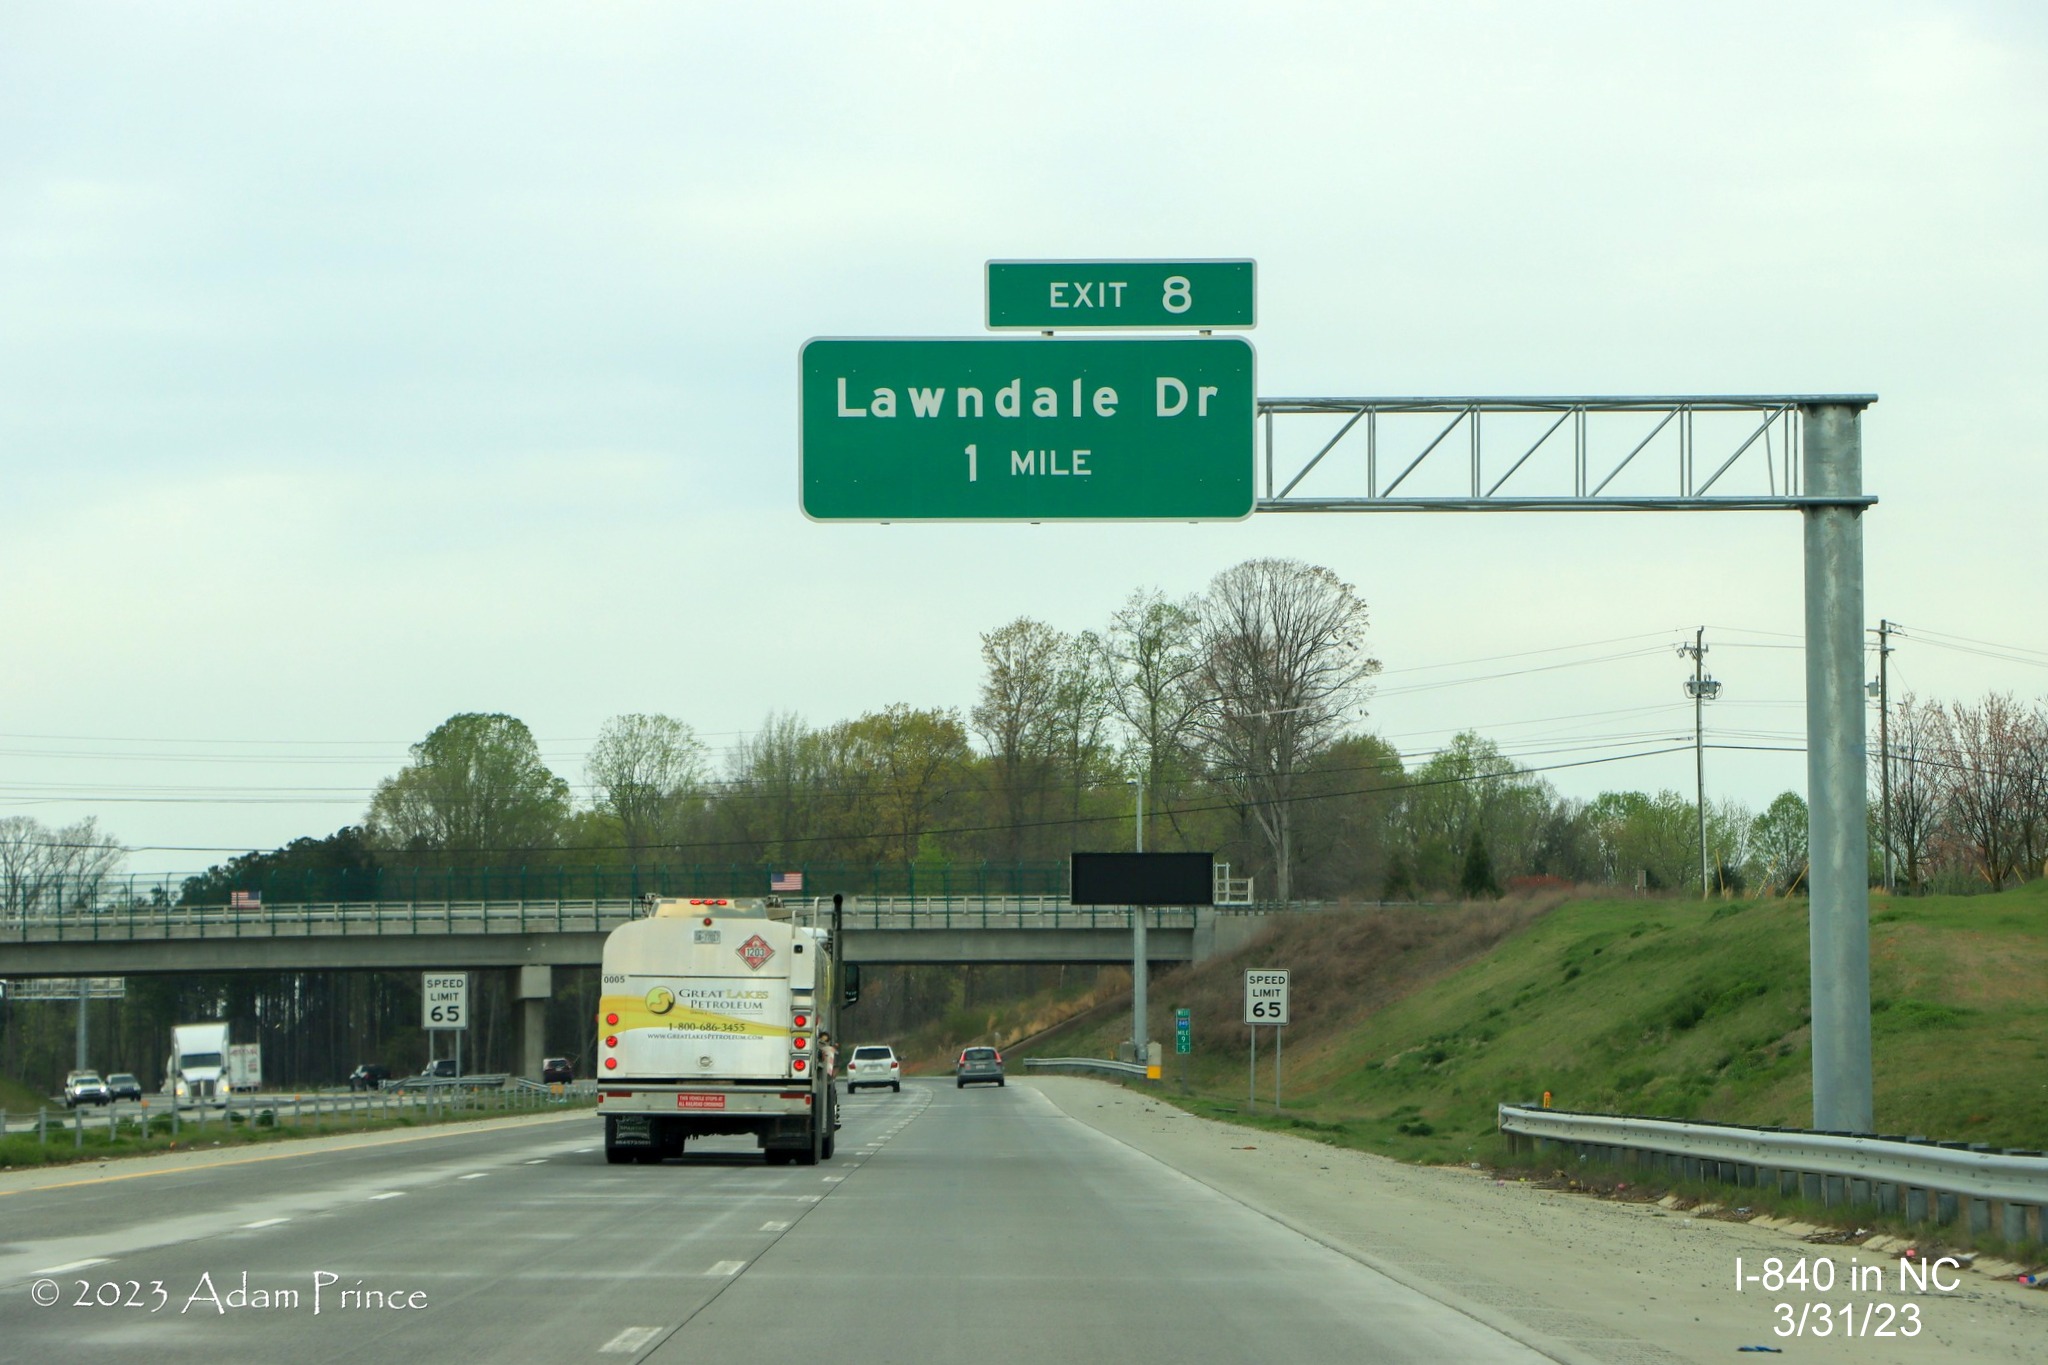 Image of 1 mile advance sign for Lawndale Drive exit on I-840 West/Greensboro Urban Loop, Adam Prince, 
             March 2023